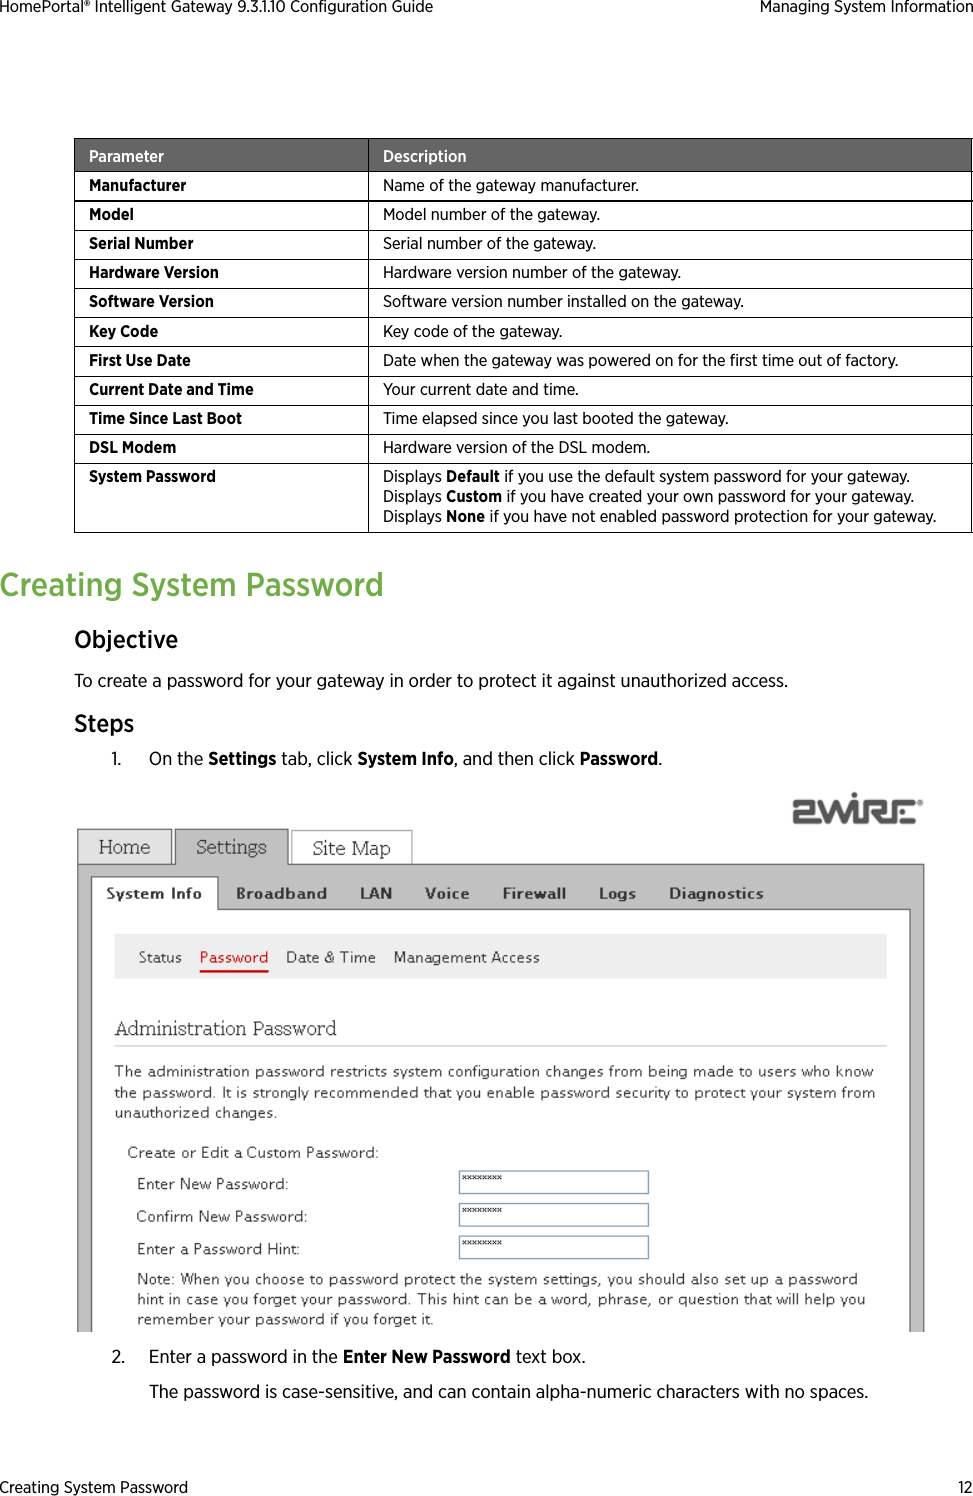 Creating System Password 12HomePortal® Intelligent Gateway 9.3.1.10 Configuration Guide Managing System InformationCreating System PasswordObjectiveTo create a password for your gateway in order to protect it against unauthorized access.Steps1. On the Settings tab, click System Info, and then click Password.2. Enter a password in the Enter New Password text box. The password is case-sensitive, and can contain alpha-numeric characters with no spaces.Parameter DescriptionManufacturer Name of the gateway manufacturer.Model Model number of the gateway.Serial Number Serial number of the gateway.Hardware Version Hardware version number of the gateway.Software Version Software version number installed on the gateway.Key Code Key code of the gateway.First Use Date Date when the gateway was powered on for the first time out of factory.Current Date and Time Your current date and time.Time Since Last Boot Time elapsed since you last booted the gateway.DSL Modem Hardware version of the DSL modem.System Password Displays Default if you use the default system password for your gateway.Displays Custom if you have created your own password for your gateway.Displays None if you have not enabled password protection for your gateway.